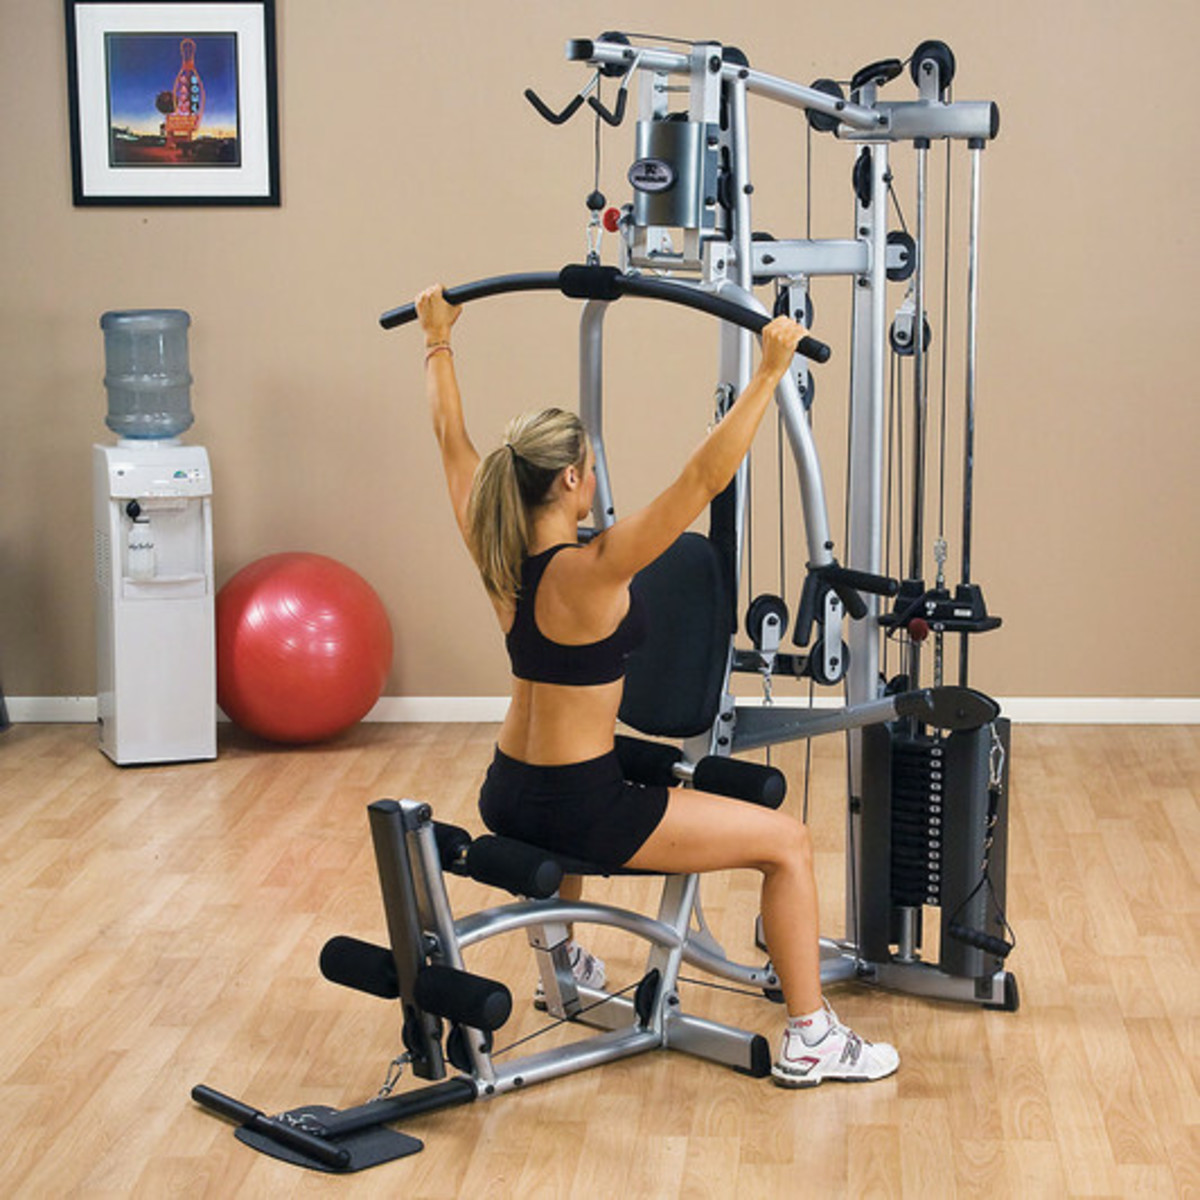 10 Advantages of AI-Assisted Home Fitness Equipment